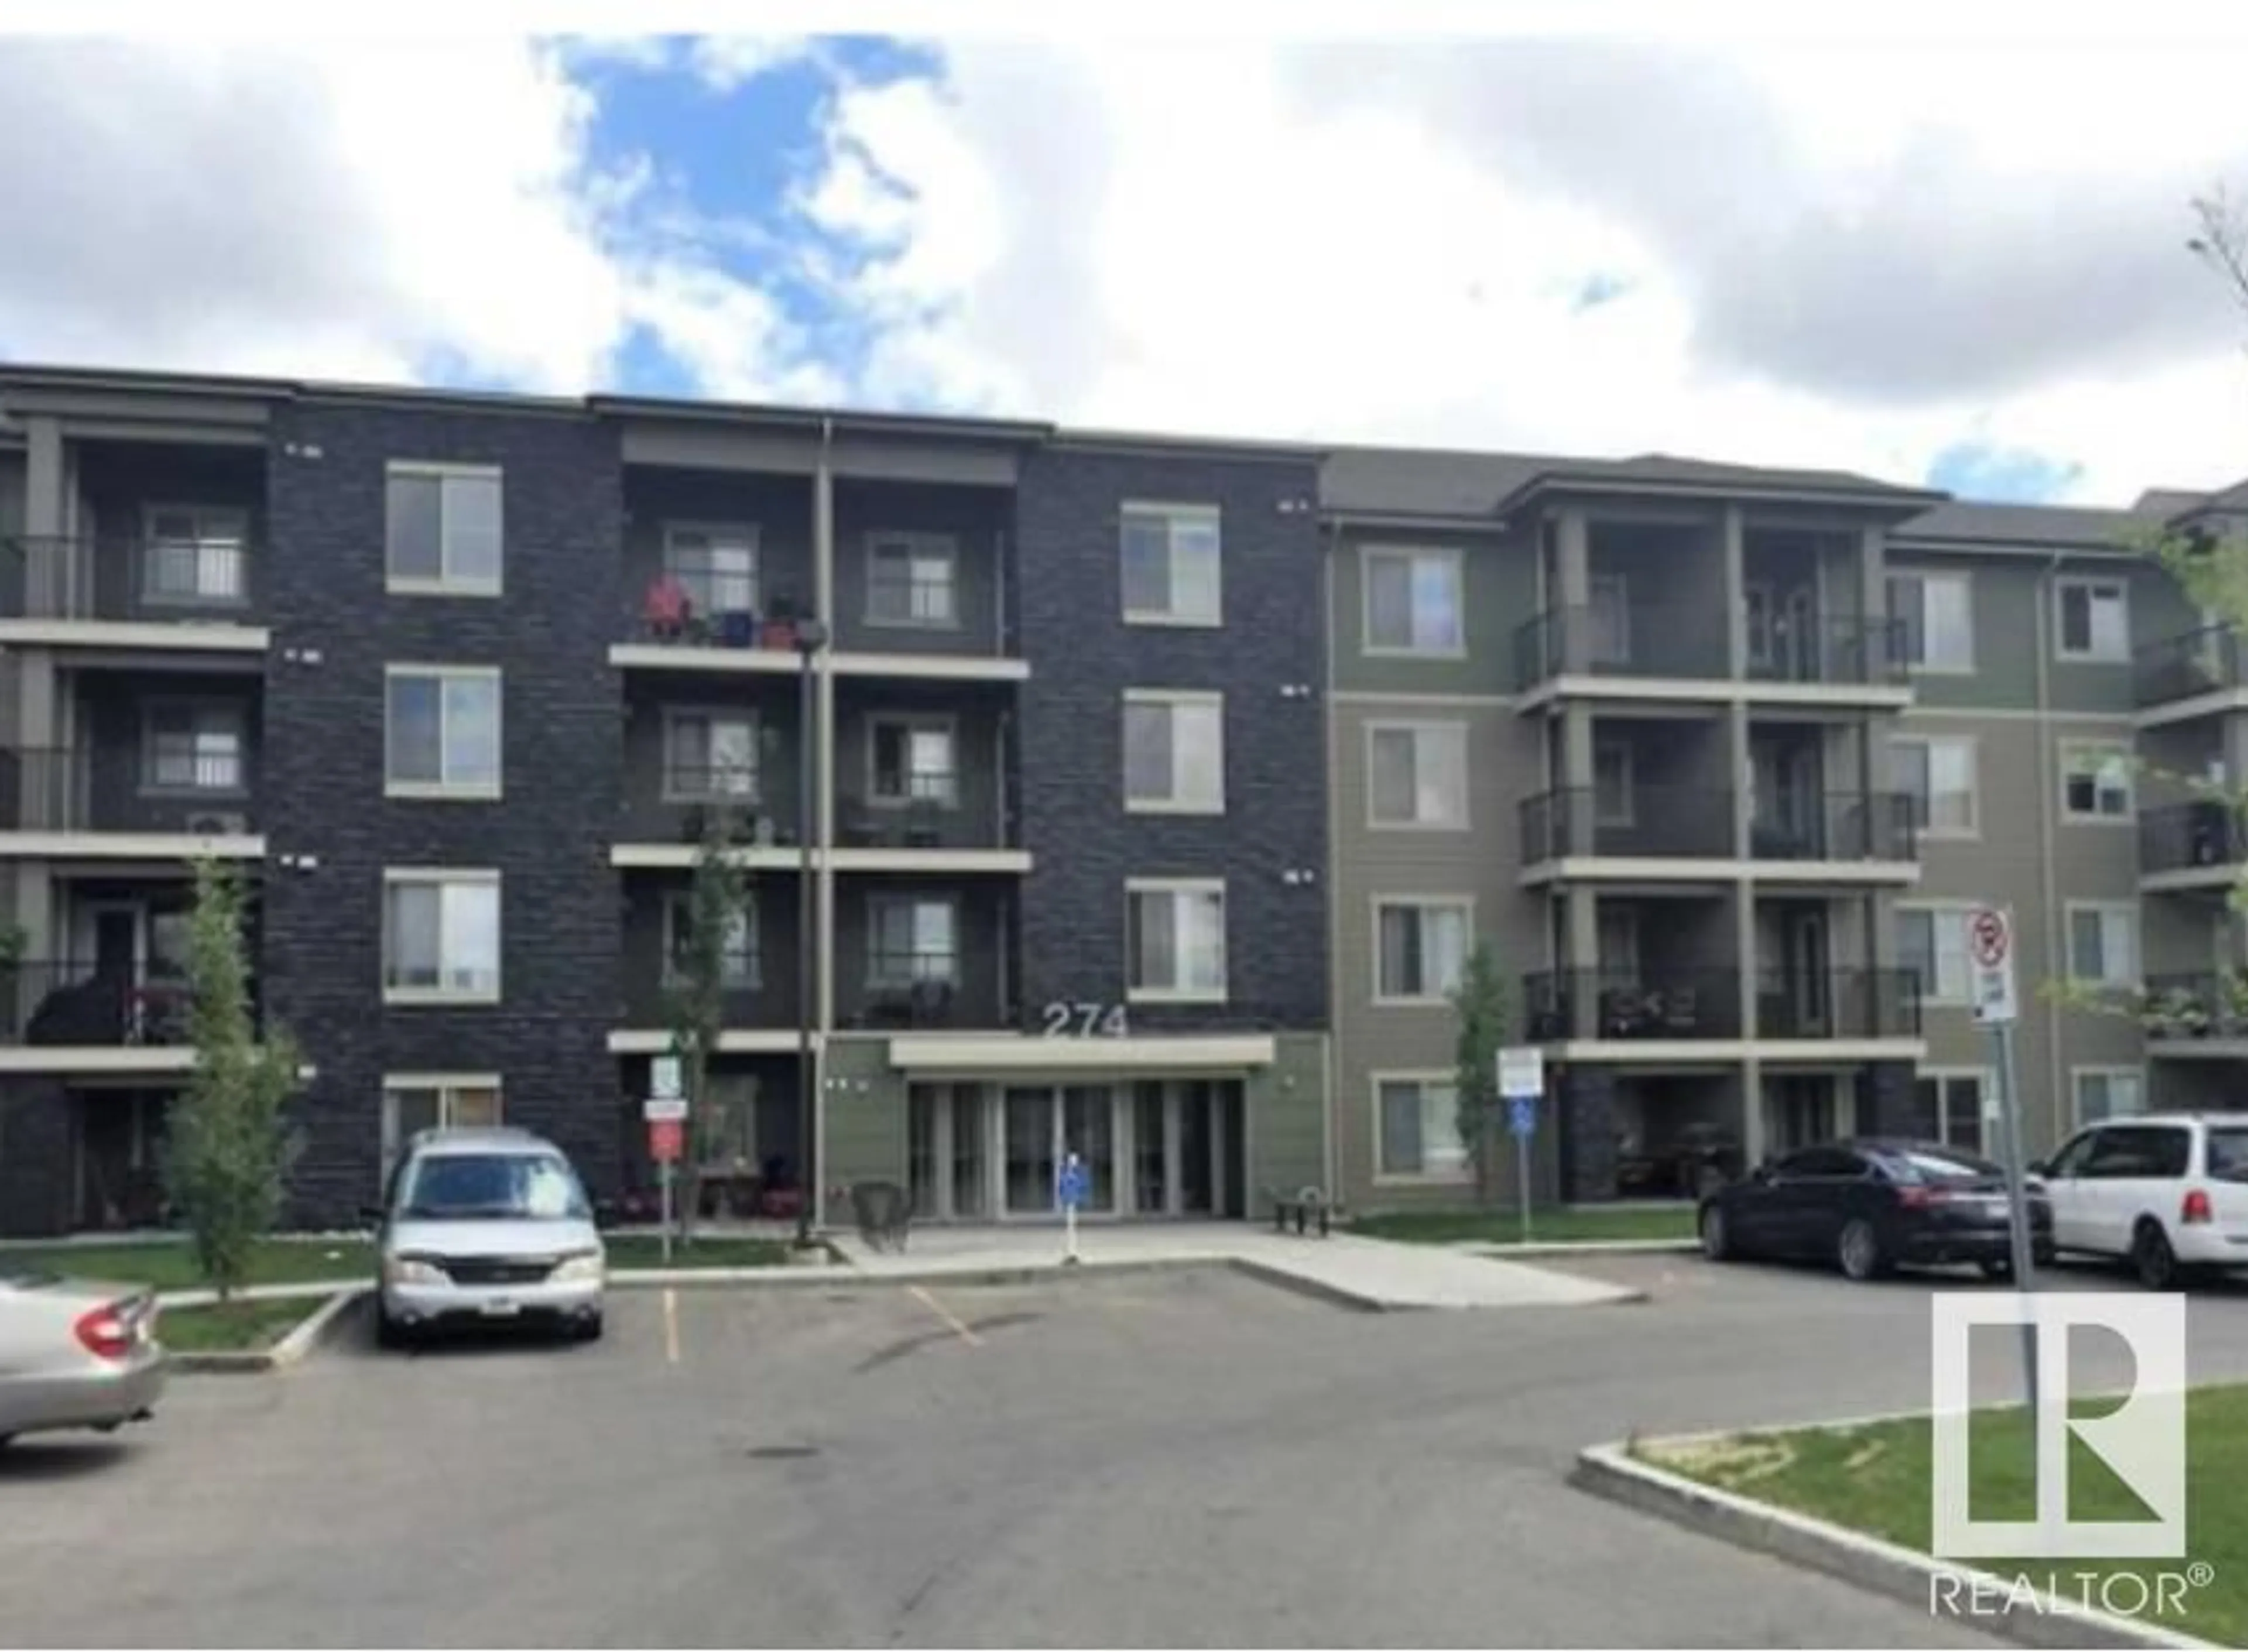 A pic from exterior of the house or condo for #304 274 MCCONACHIE DR NW, Edmonton Alberta T5Y3N4